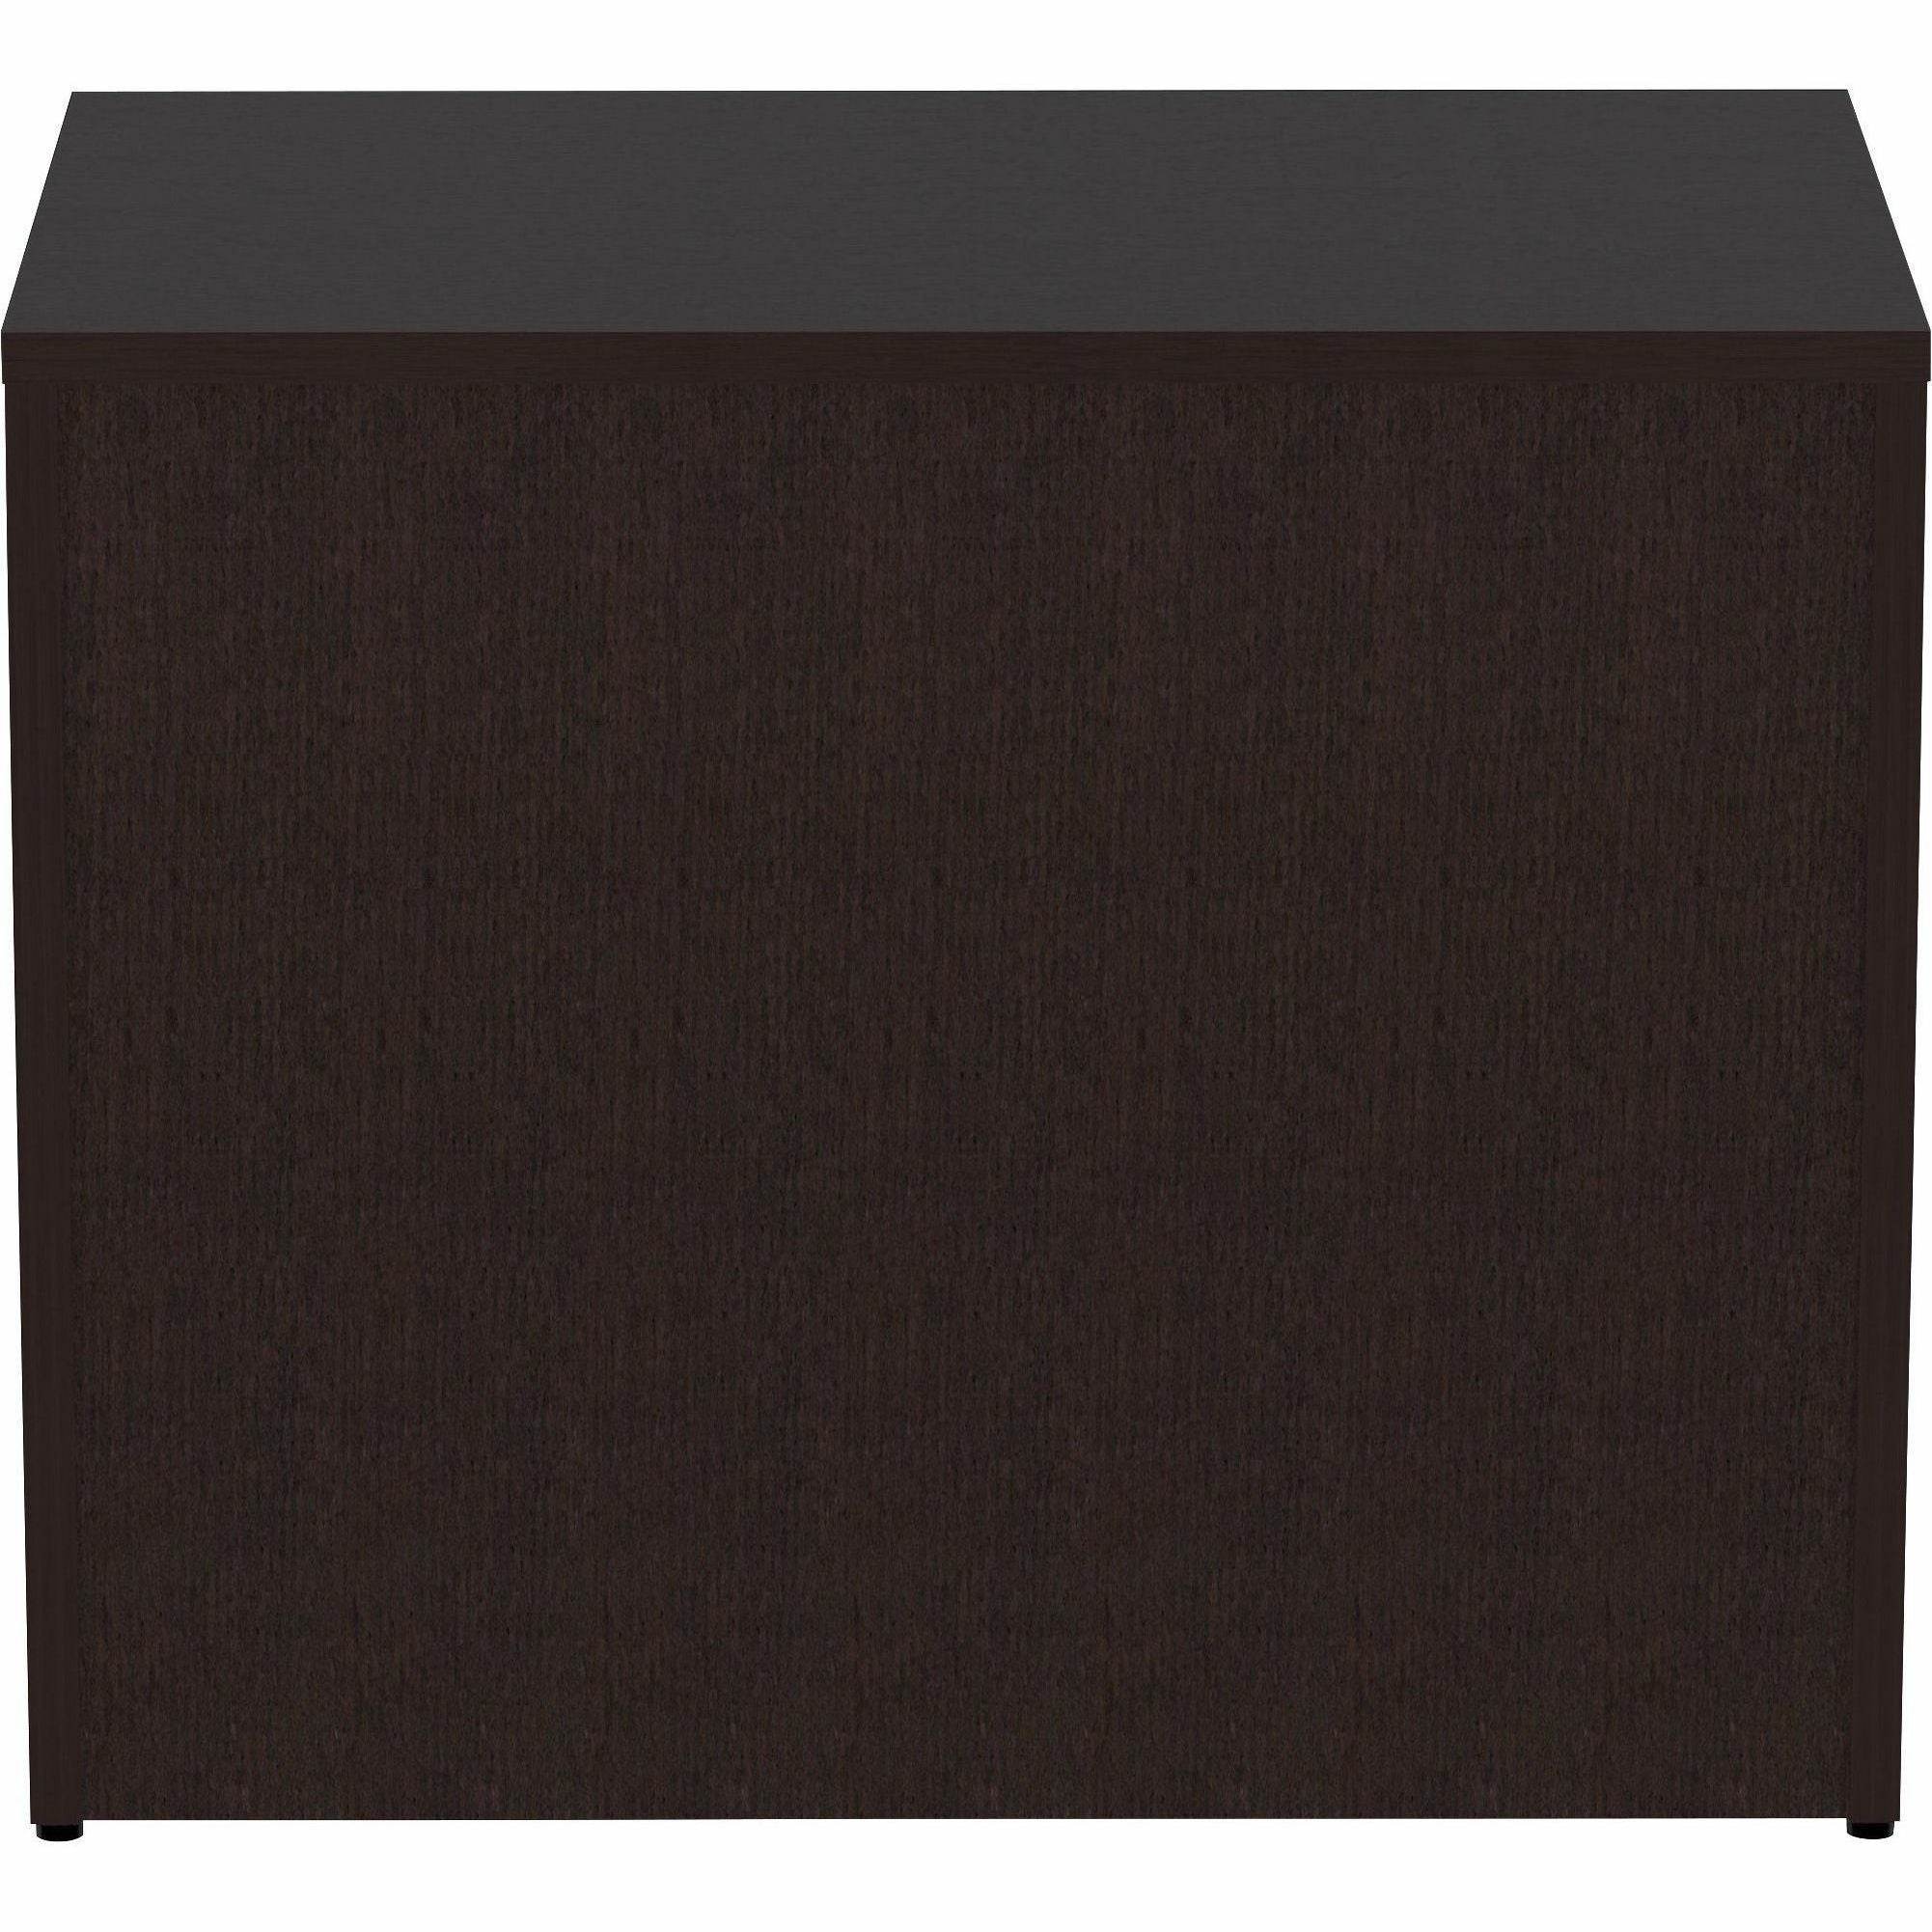 lorell-essentials-series-lateral-file-1-top-01-edge-36-x-22295-lateral-file-2-x-file-drawers-material-laminate-finish-espresso_llr18223 - 3